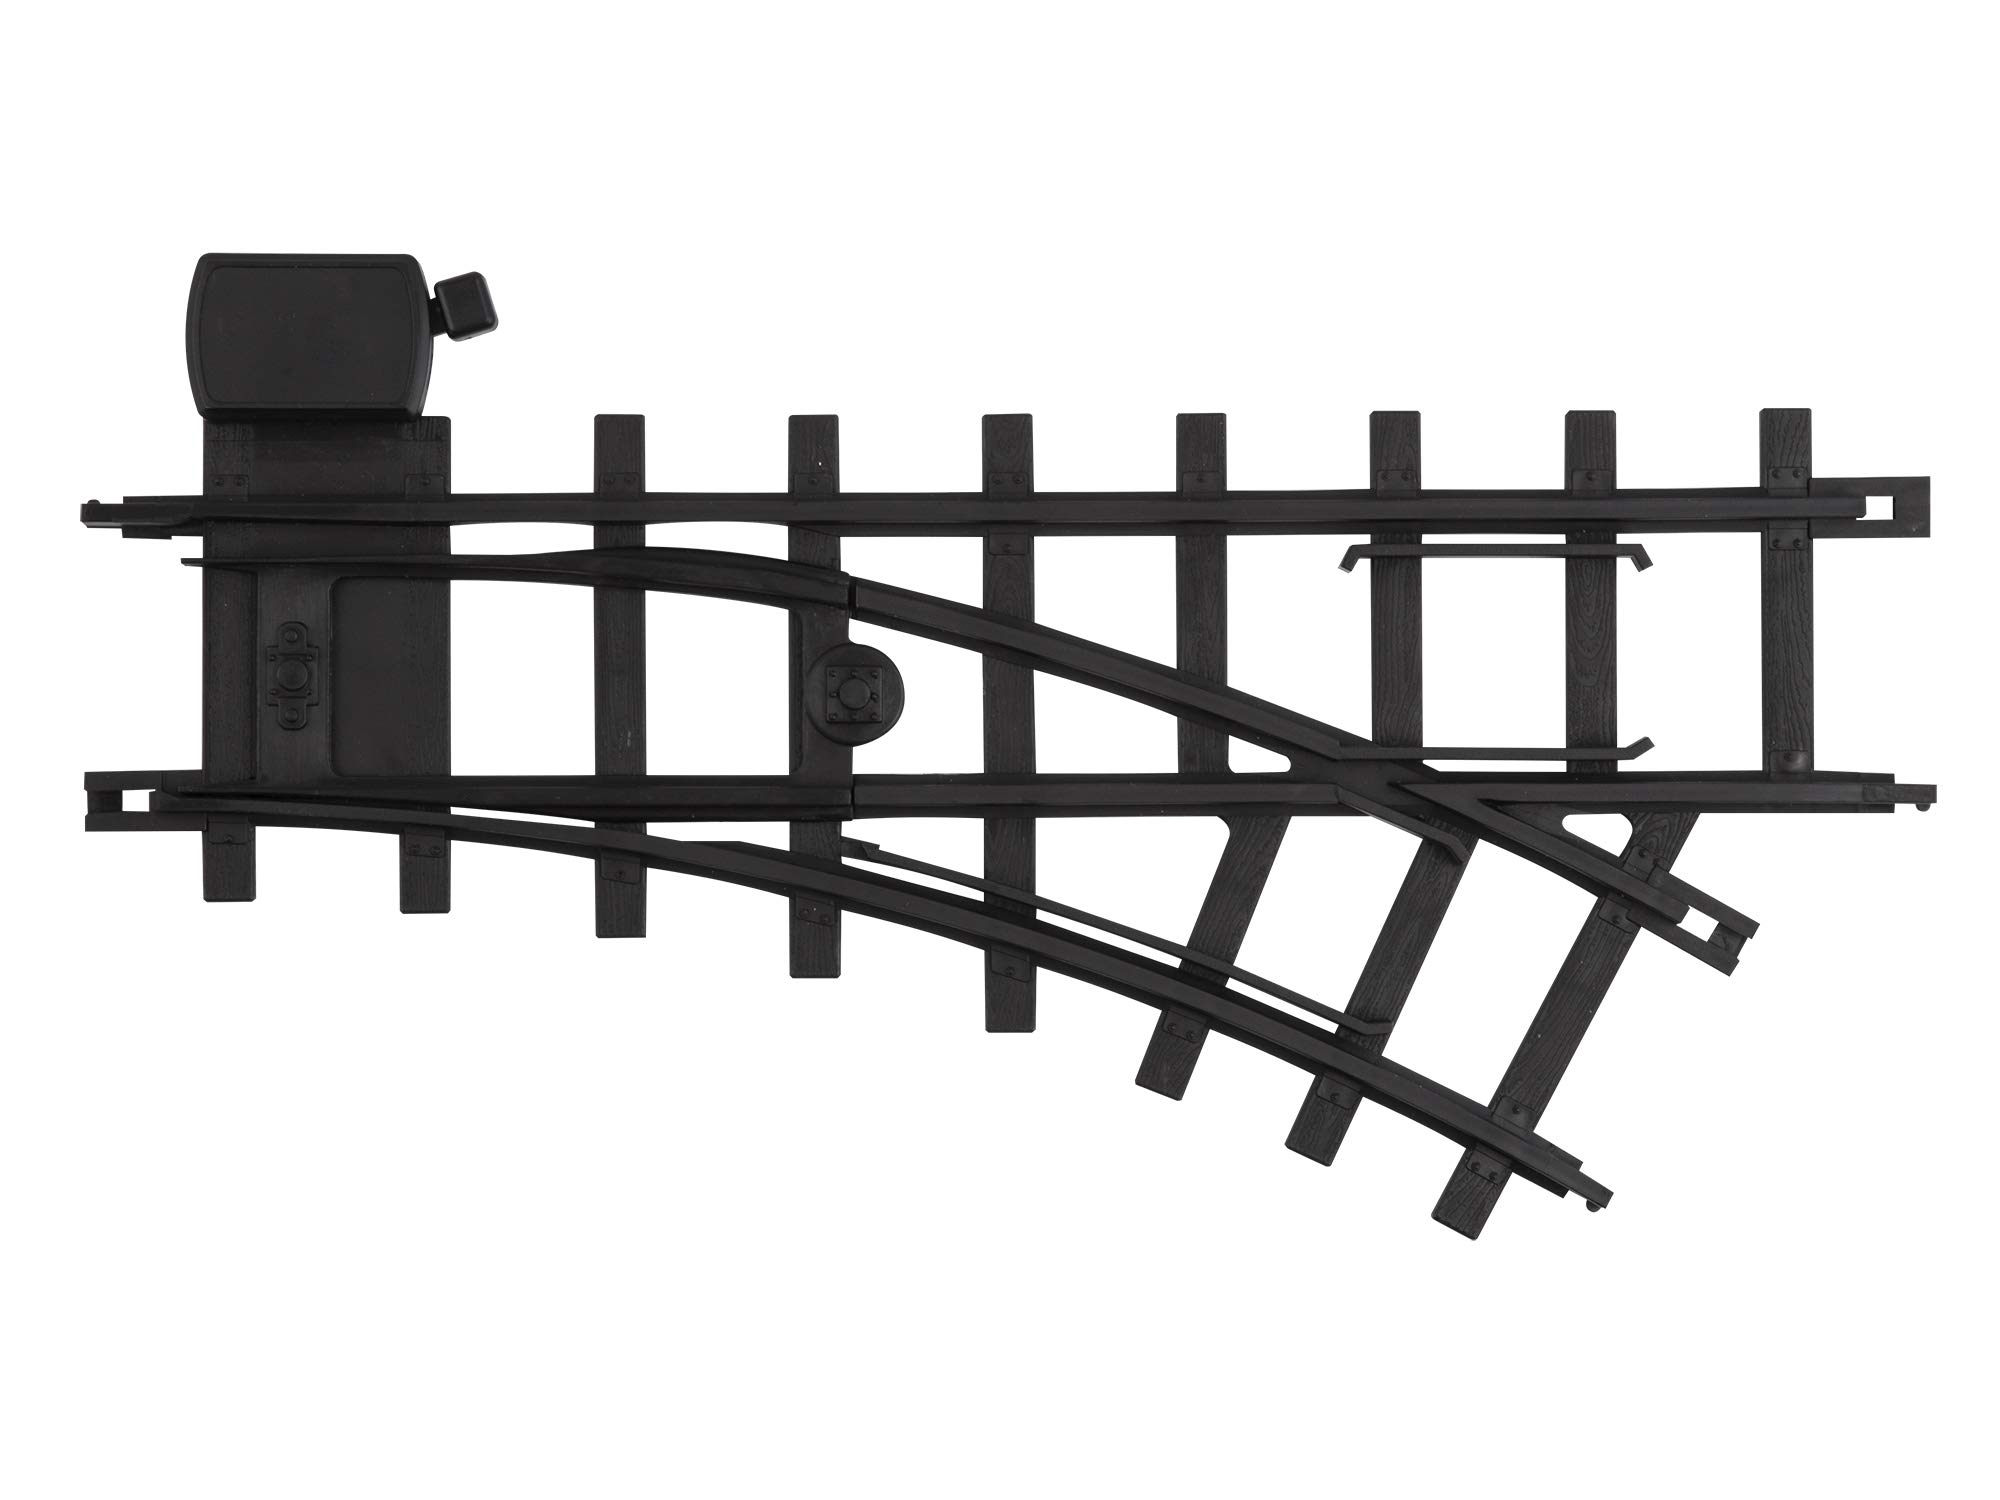 Lionel Ready-to-Play Inner Loop Track Set with 8 Curved Pieces, 1 Left Hand Switch, and 1 Right Hand Switch